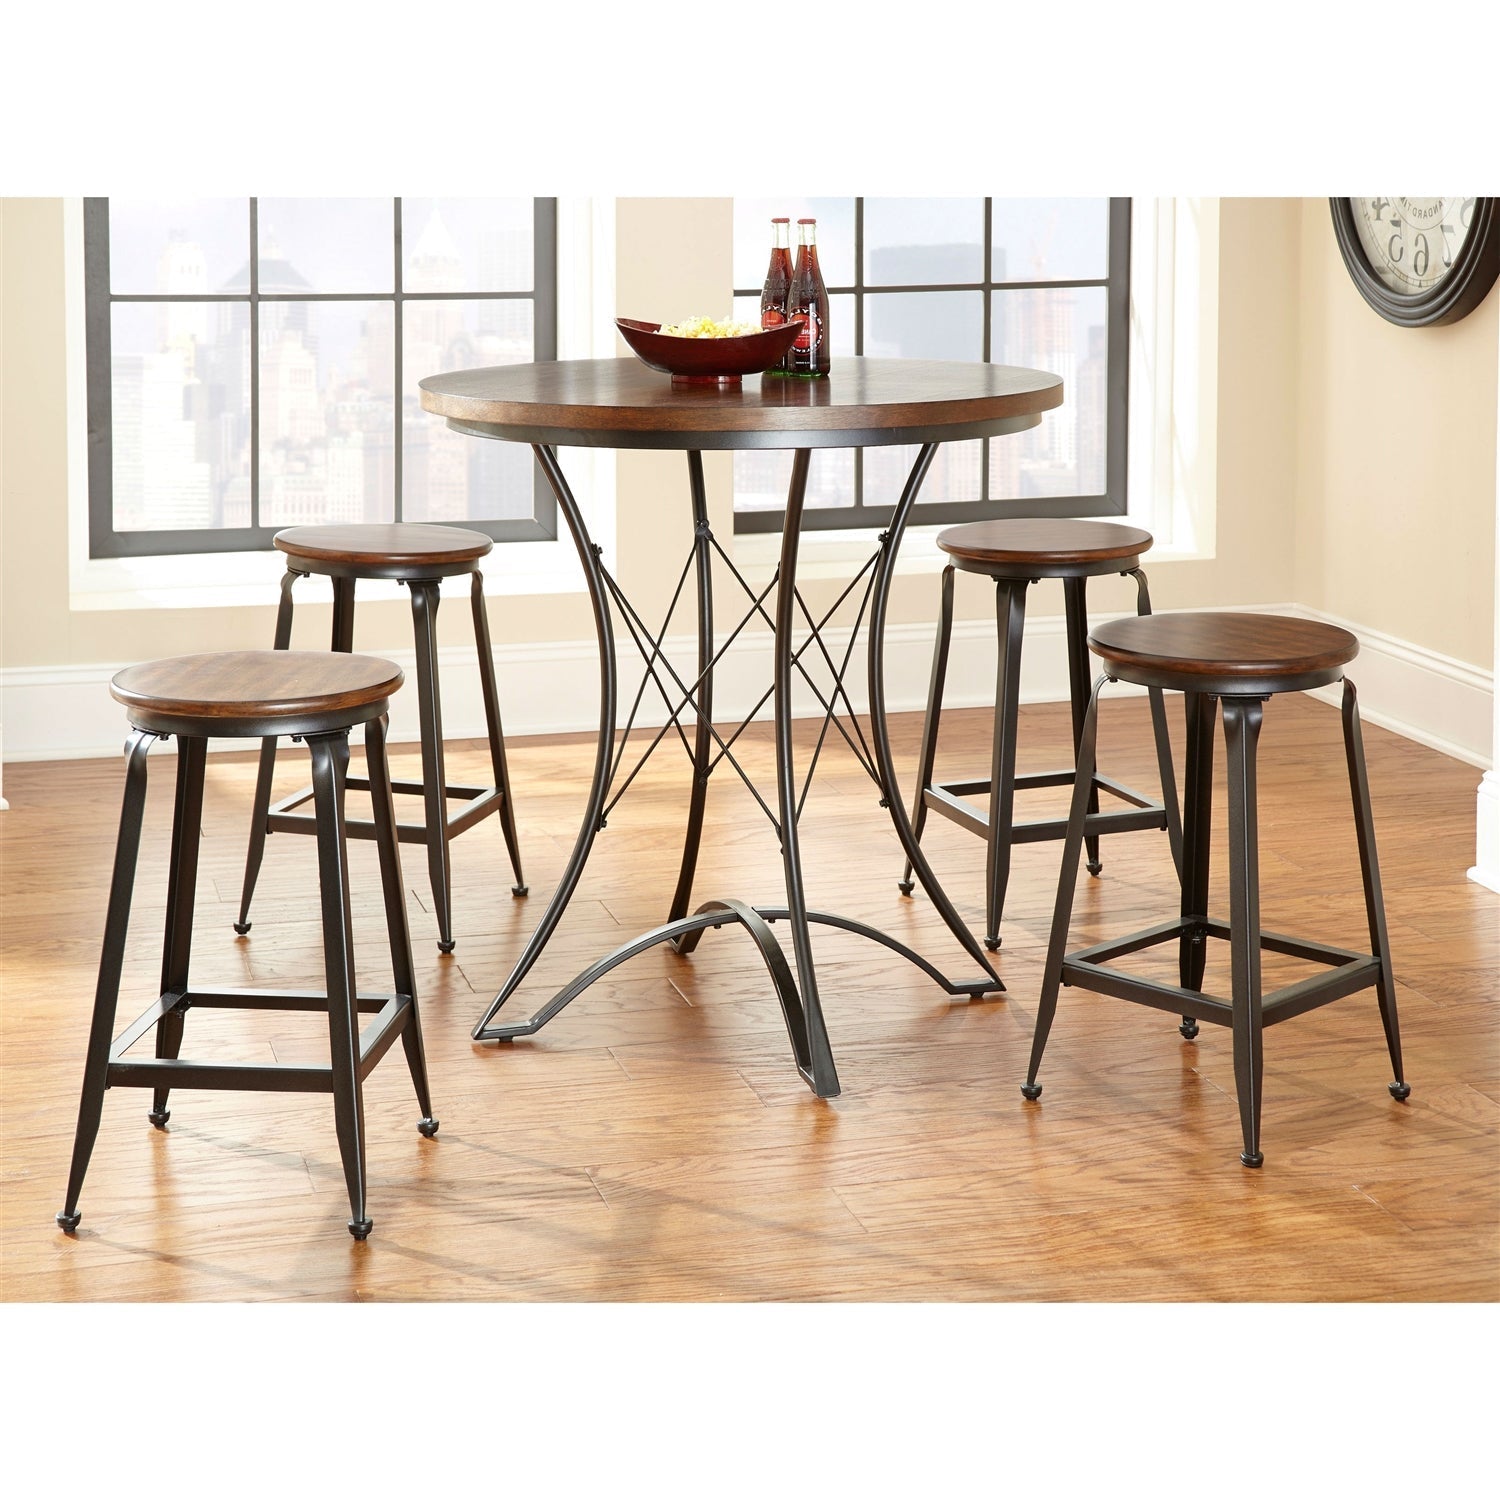 Dining > Dining Tables - Round 36-inch Counter Height Kitchen Dining Table